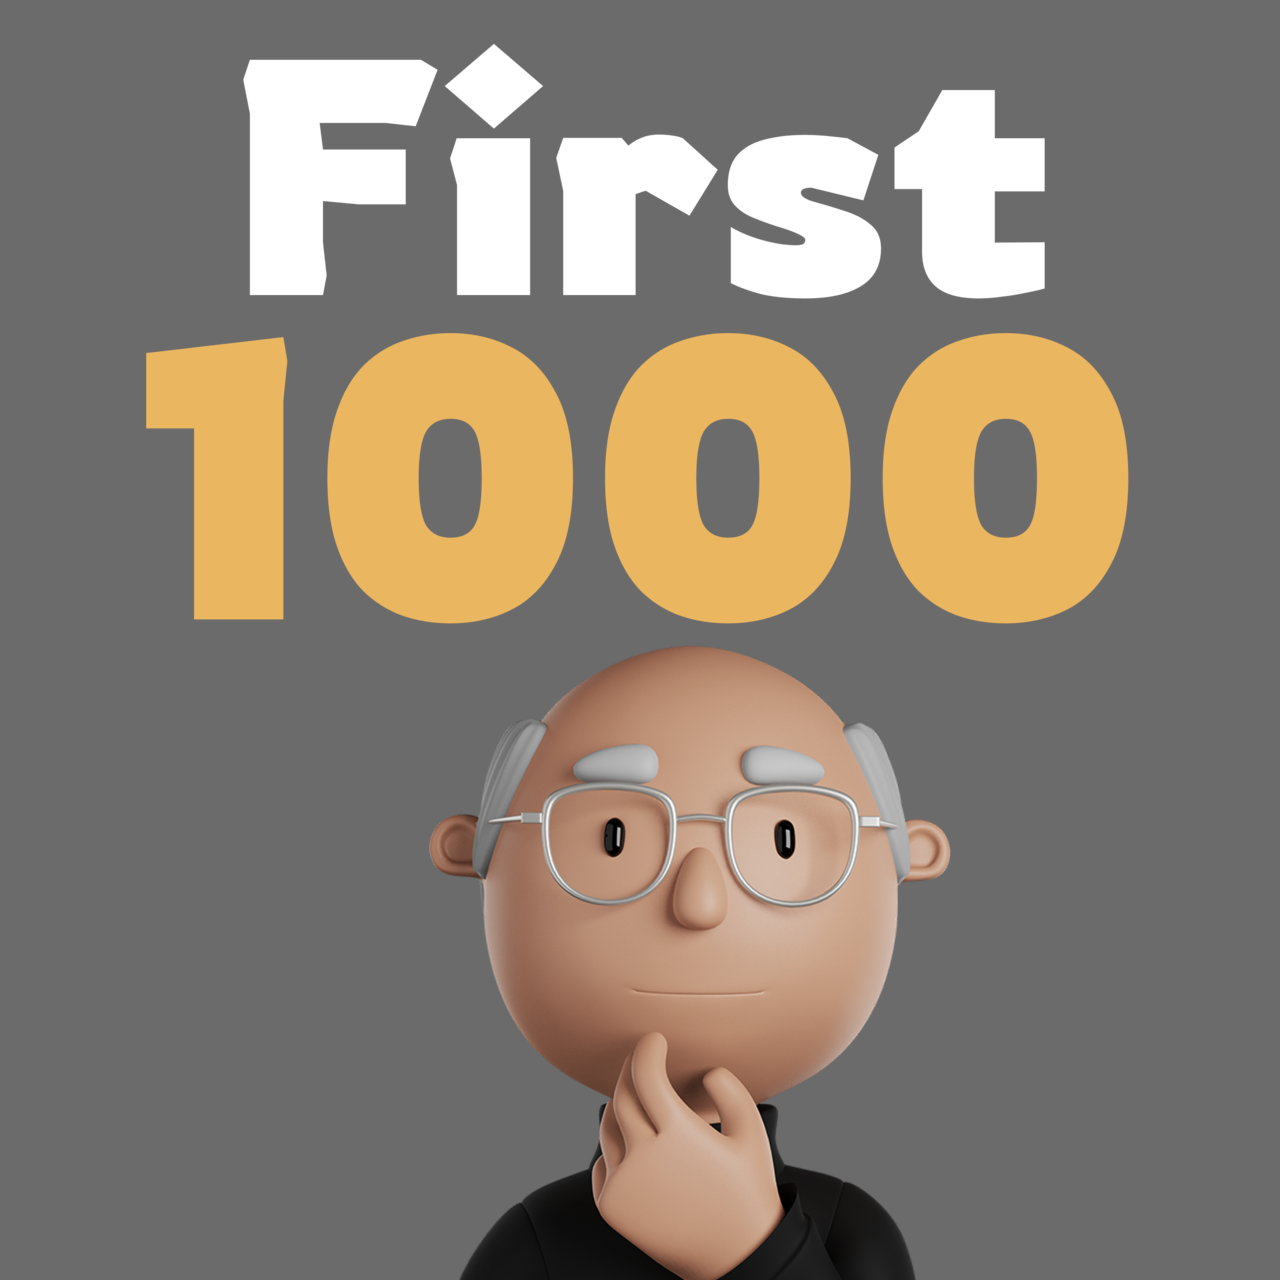 Artwork for First 1000